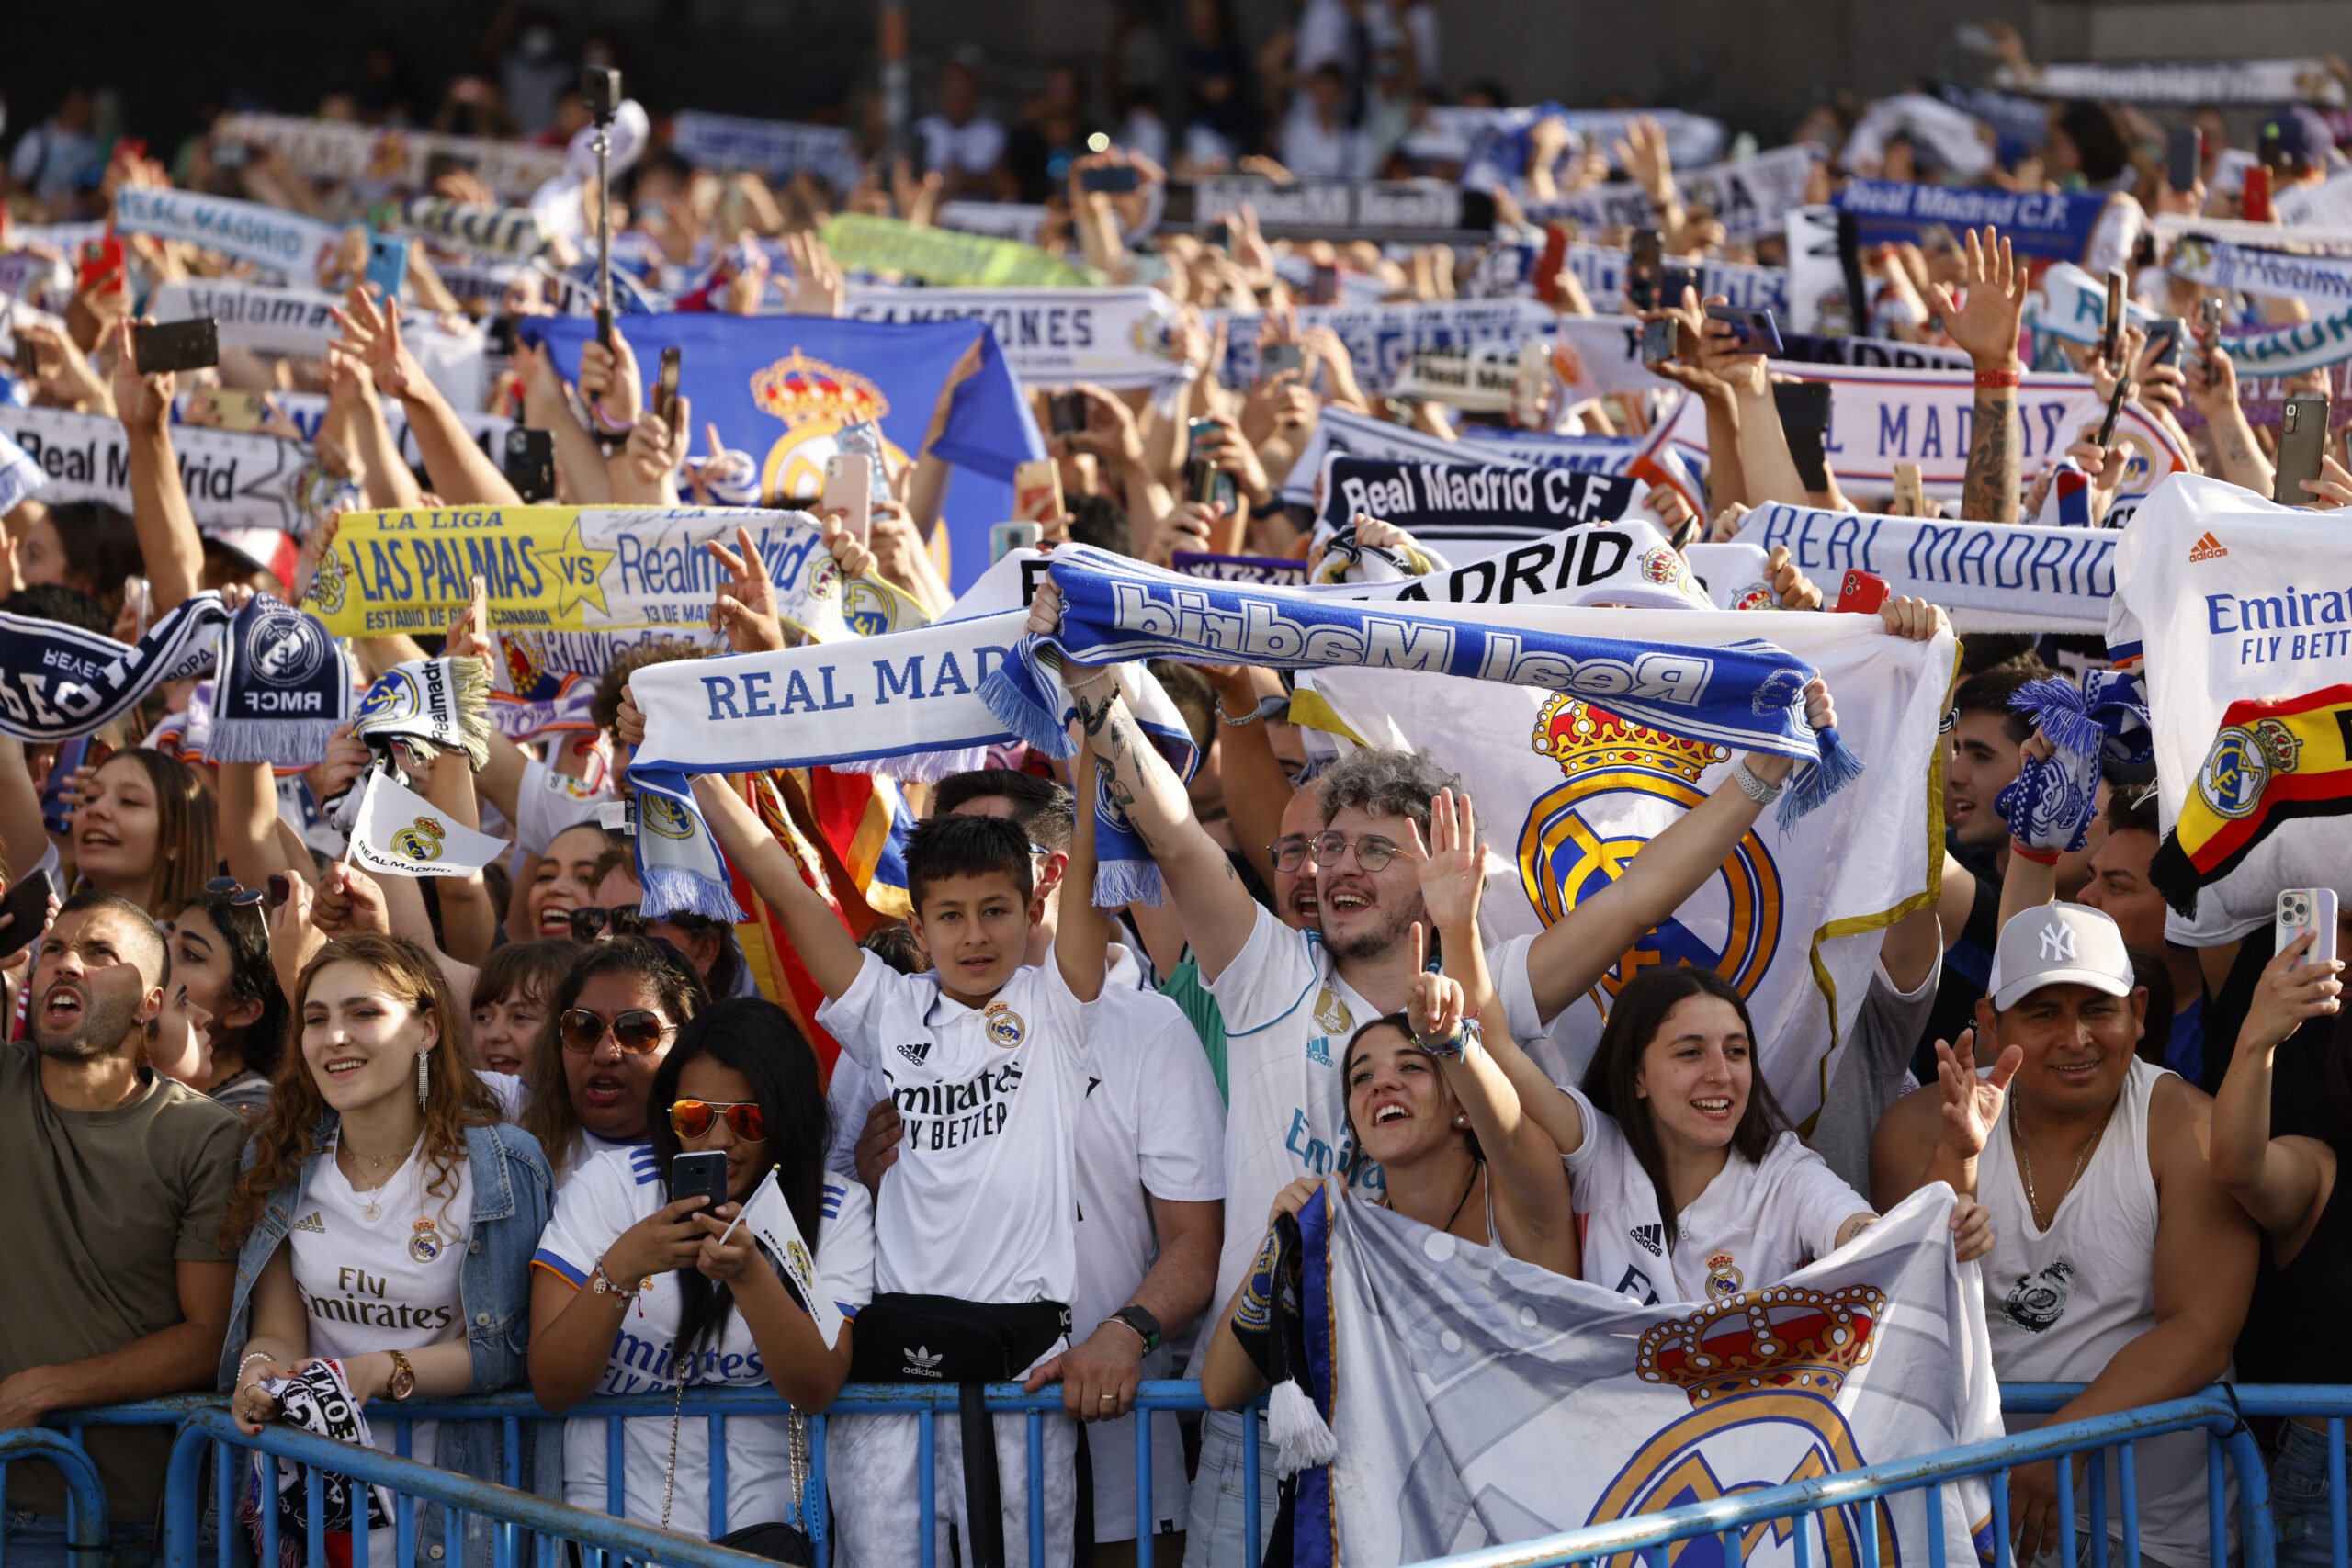 UEFA's Oversight Leaves Real Madrid Supporters Angry